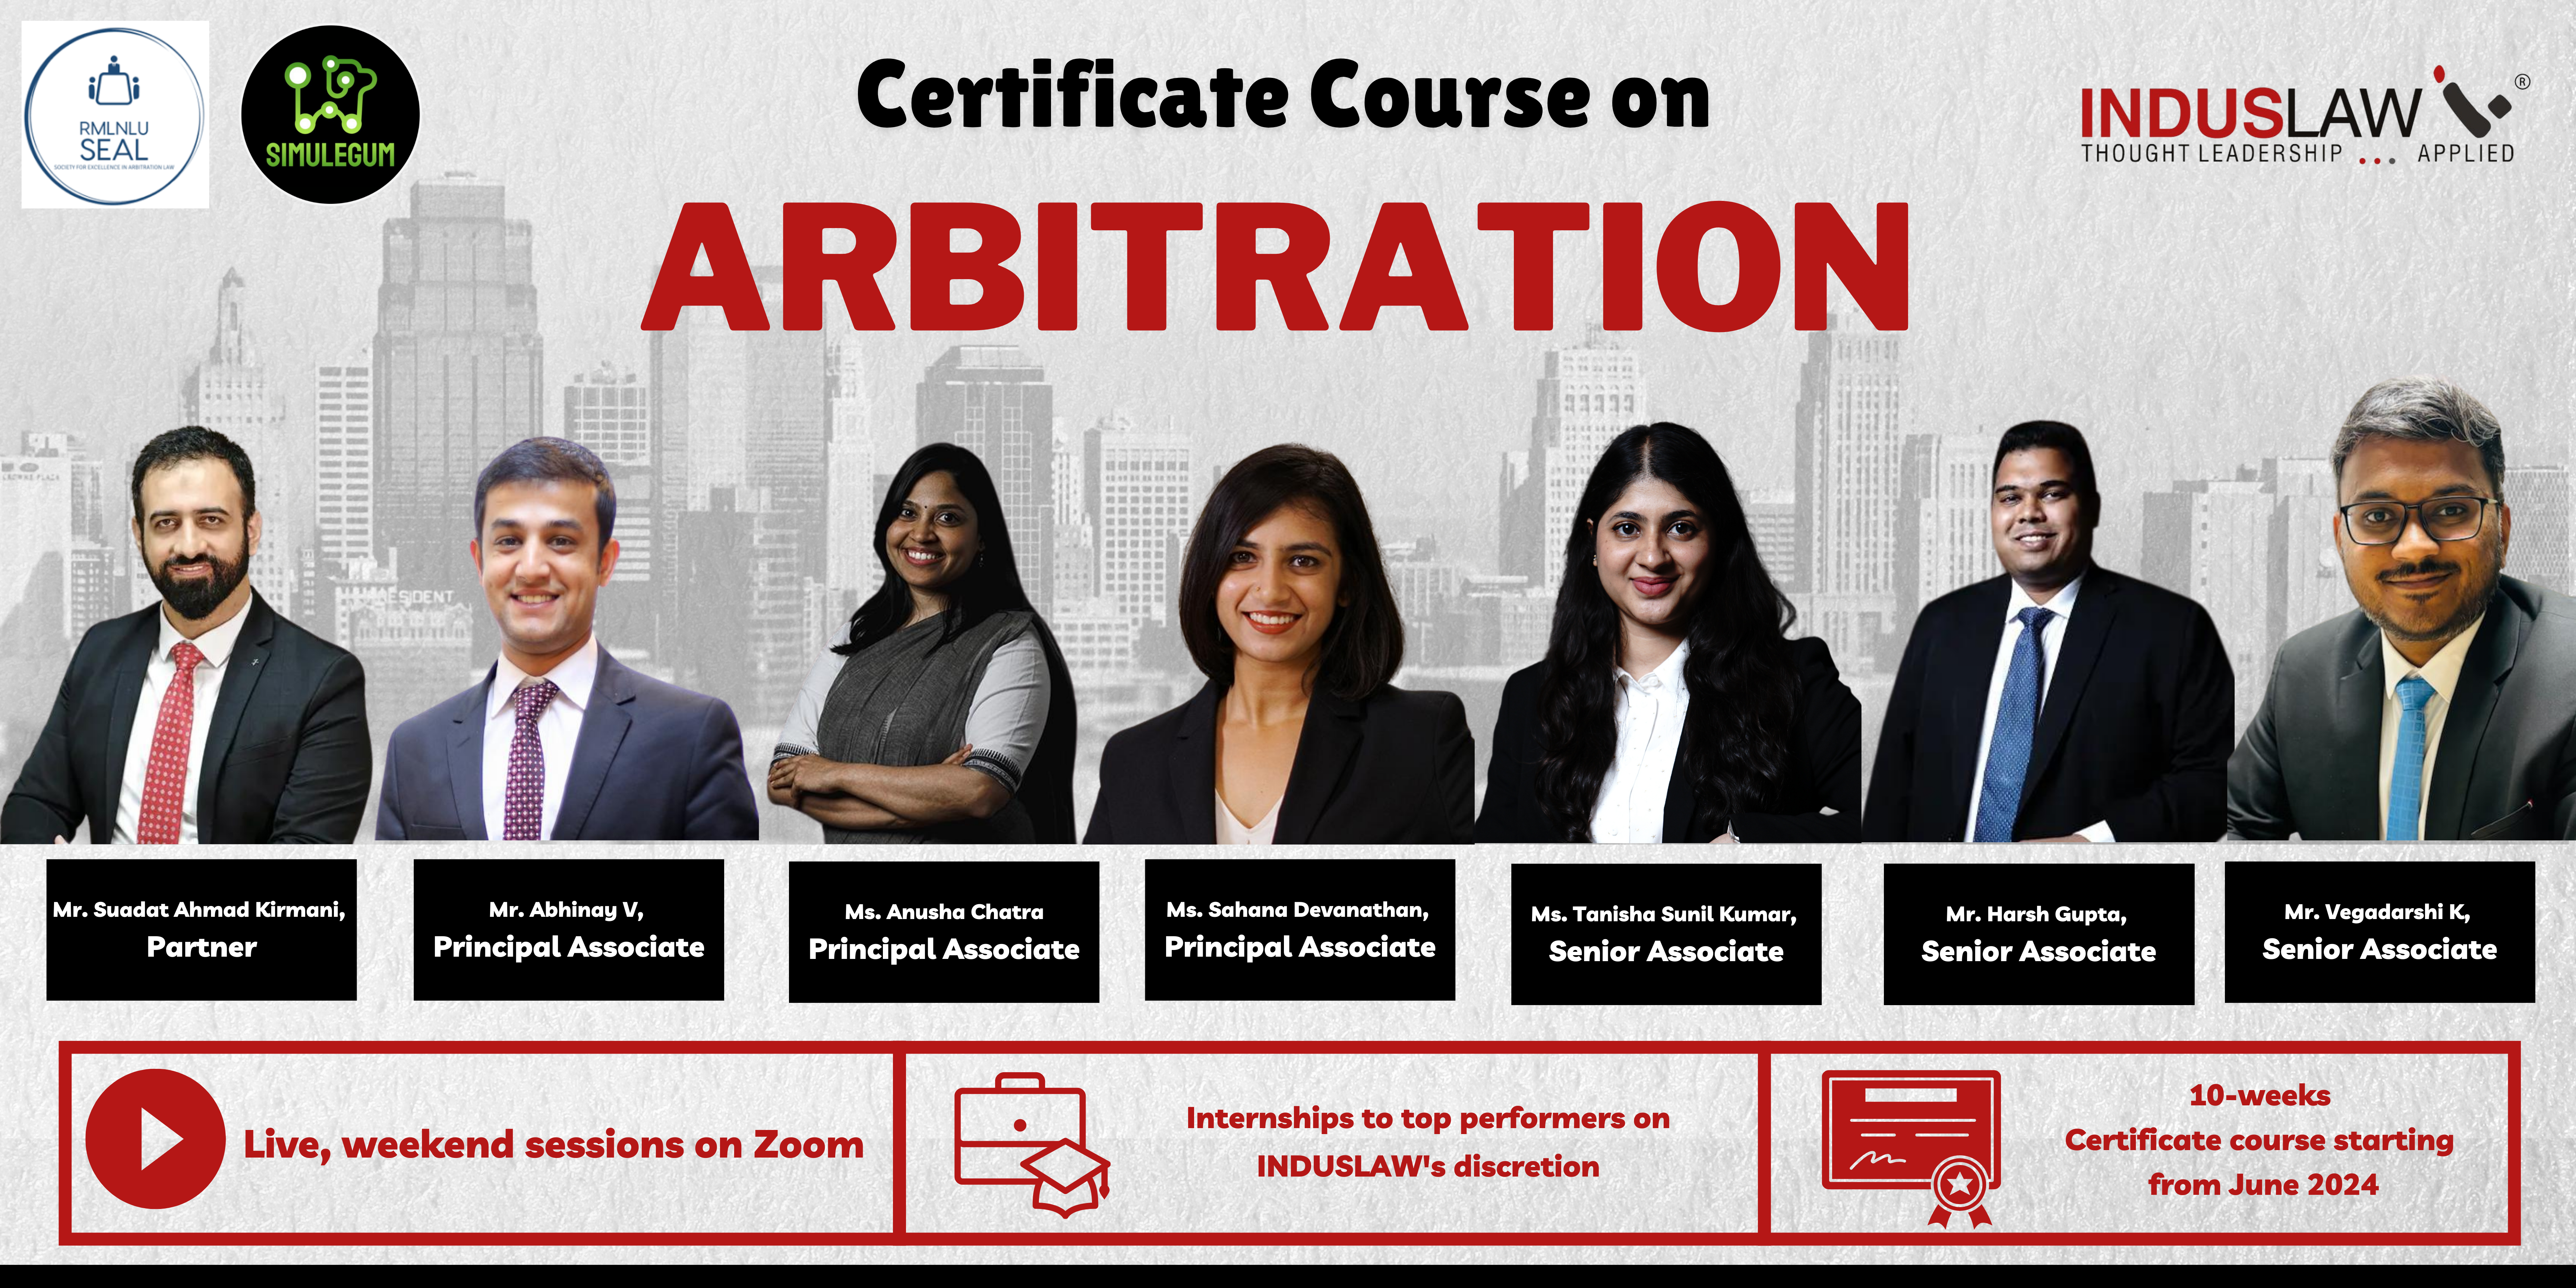 Certificate course on Arbitration by IndusLaw, SimuLegum and SEAL, RMLNLU as the Institutional Partner